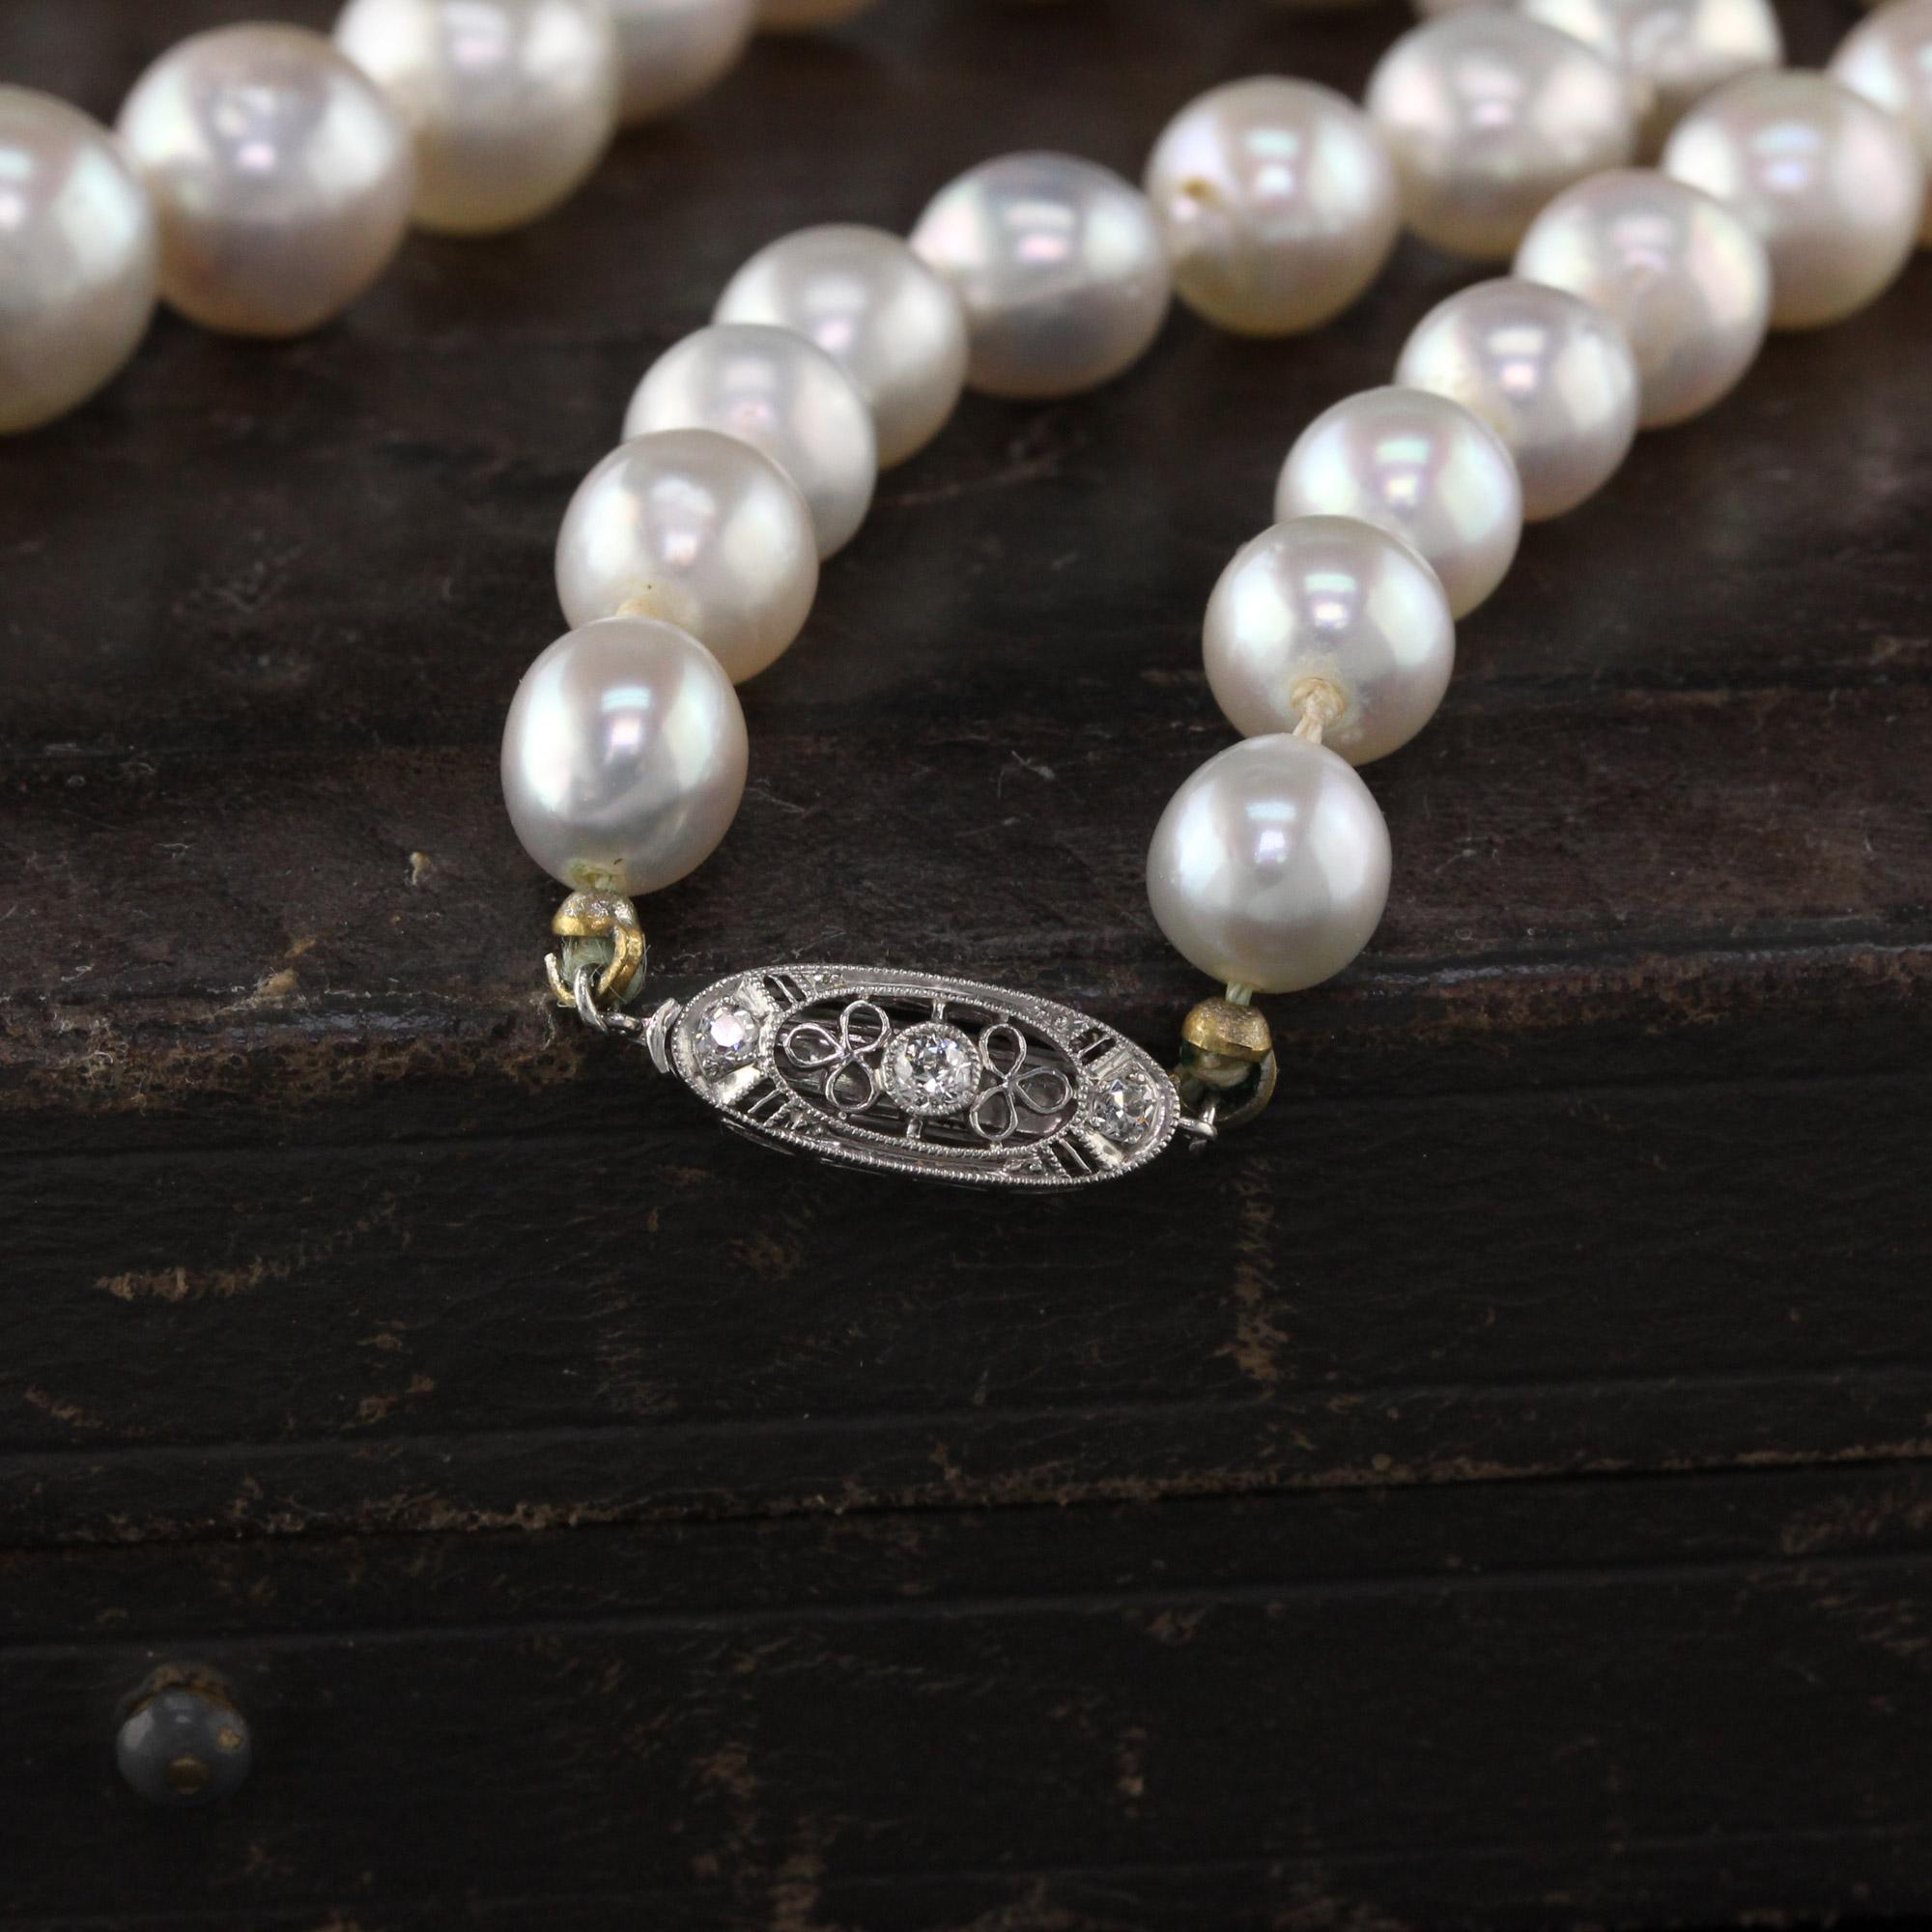 Gorgeous Antique Art Deco Saltwater Akoya Pearl Necklace with Platinum Diamond Clasp - GIA!. This beautiful necklace has a GIA report that states it is a cultured akoya pearl necklace strand and has a gorgeous silver tone to it with a beautiful